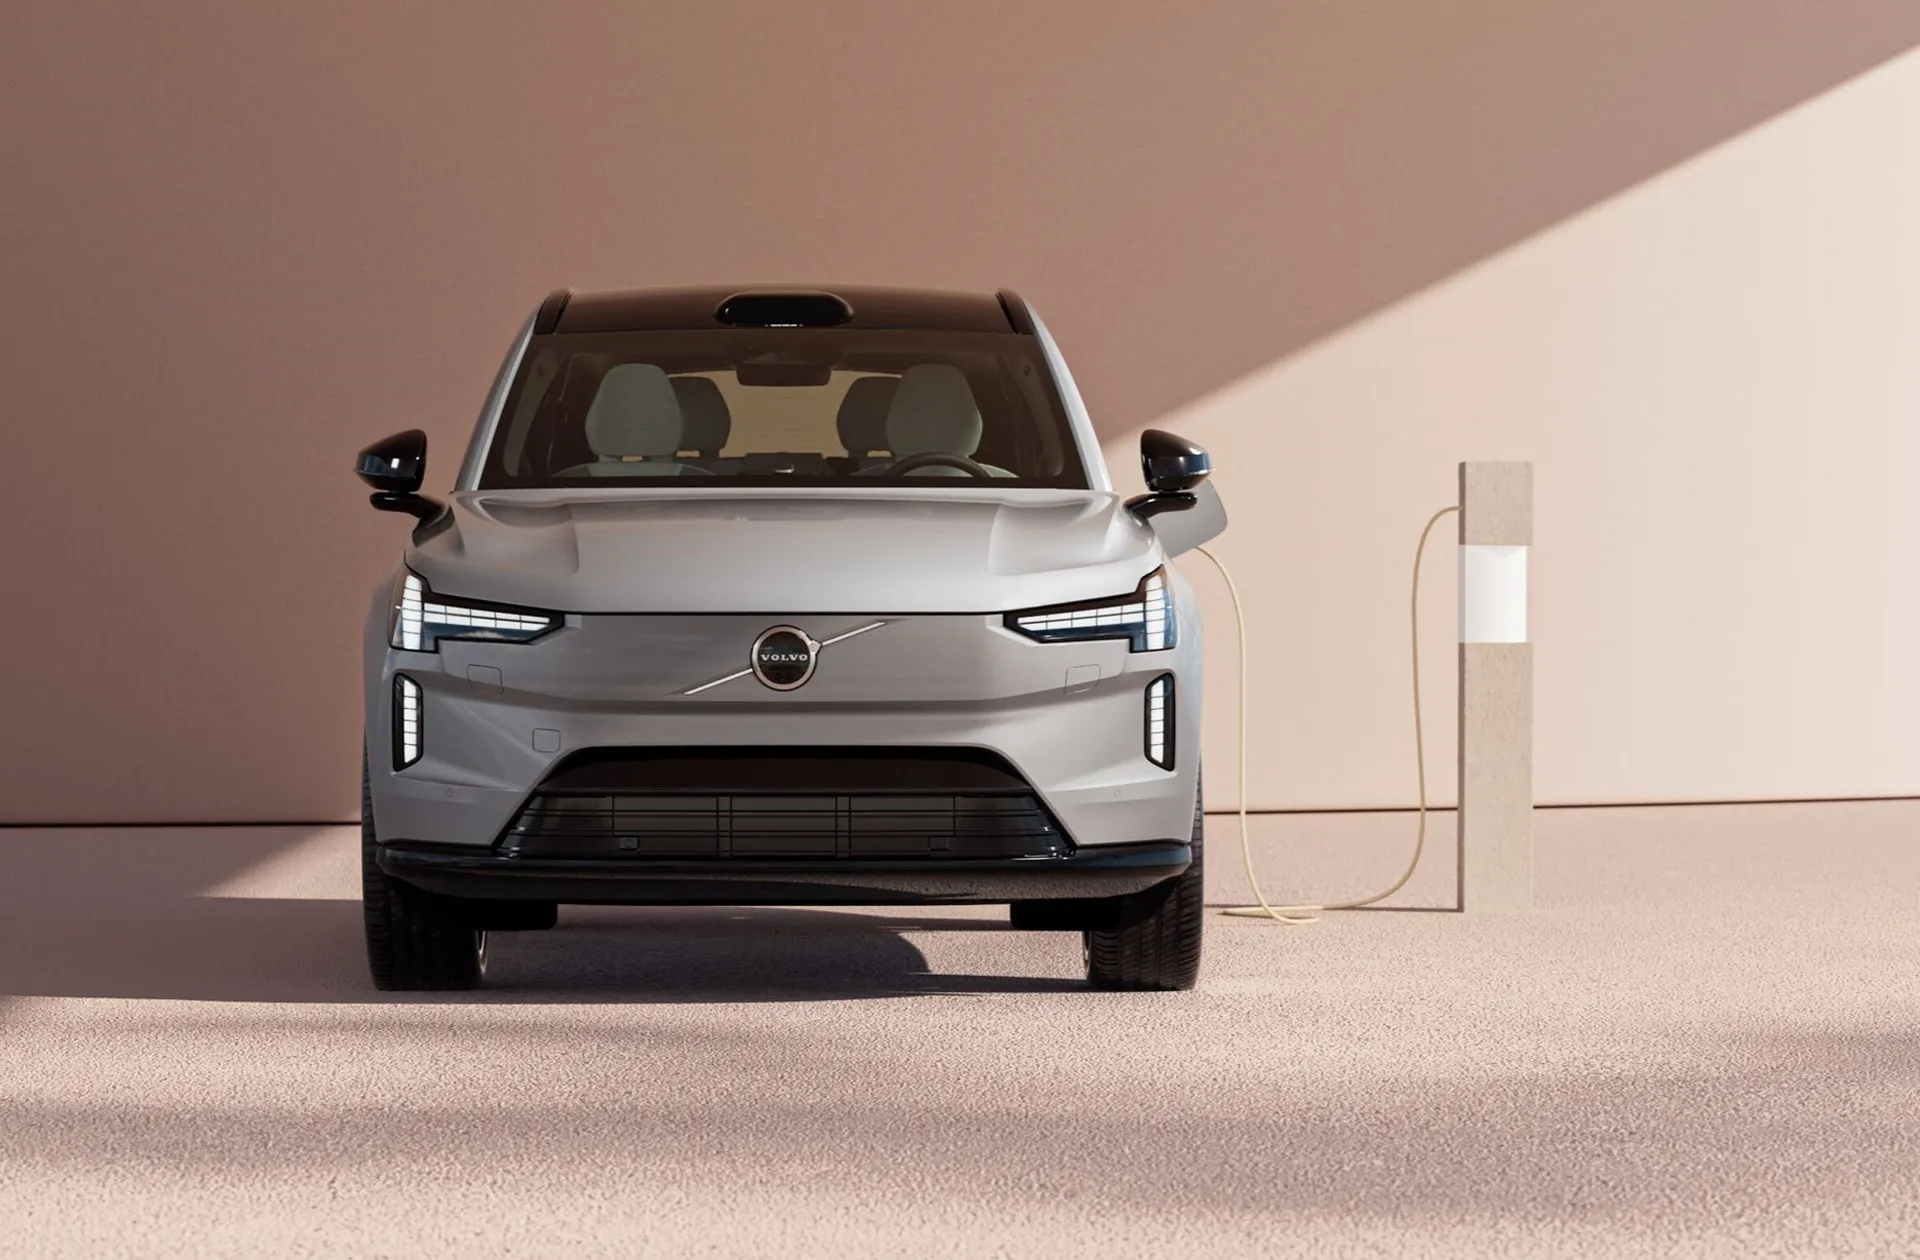 Volvo power enterprise will faucet into EVs’ bidirectional charging